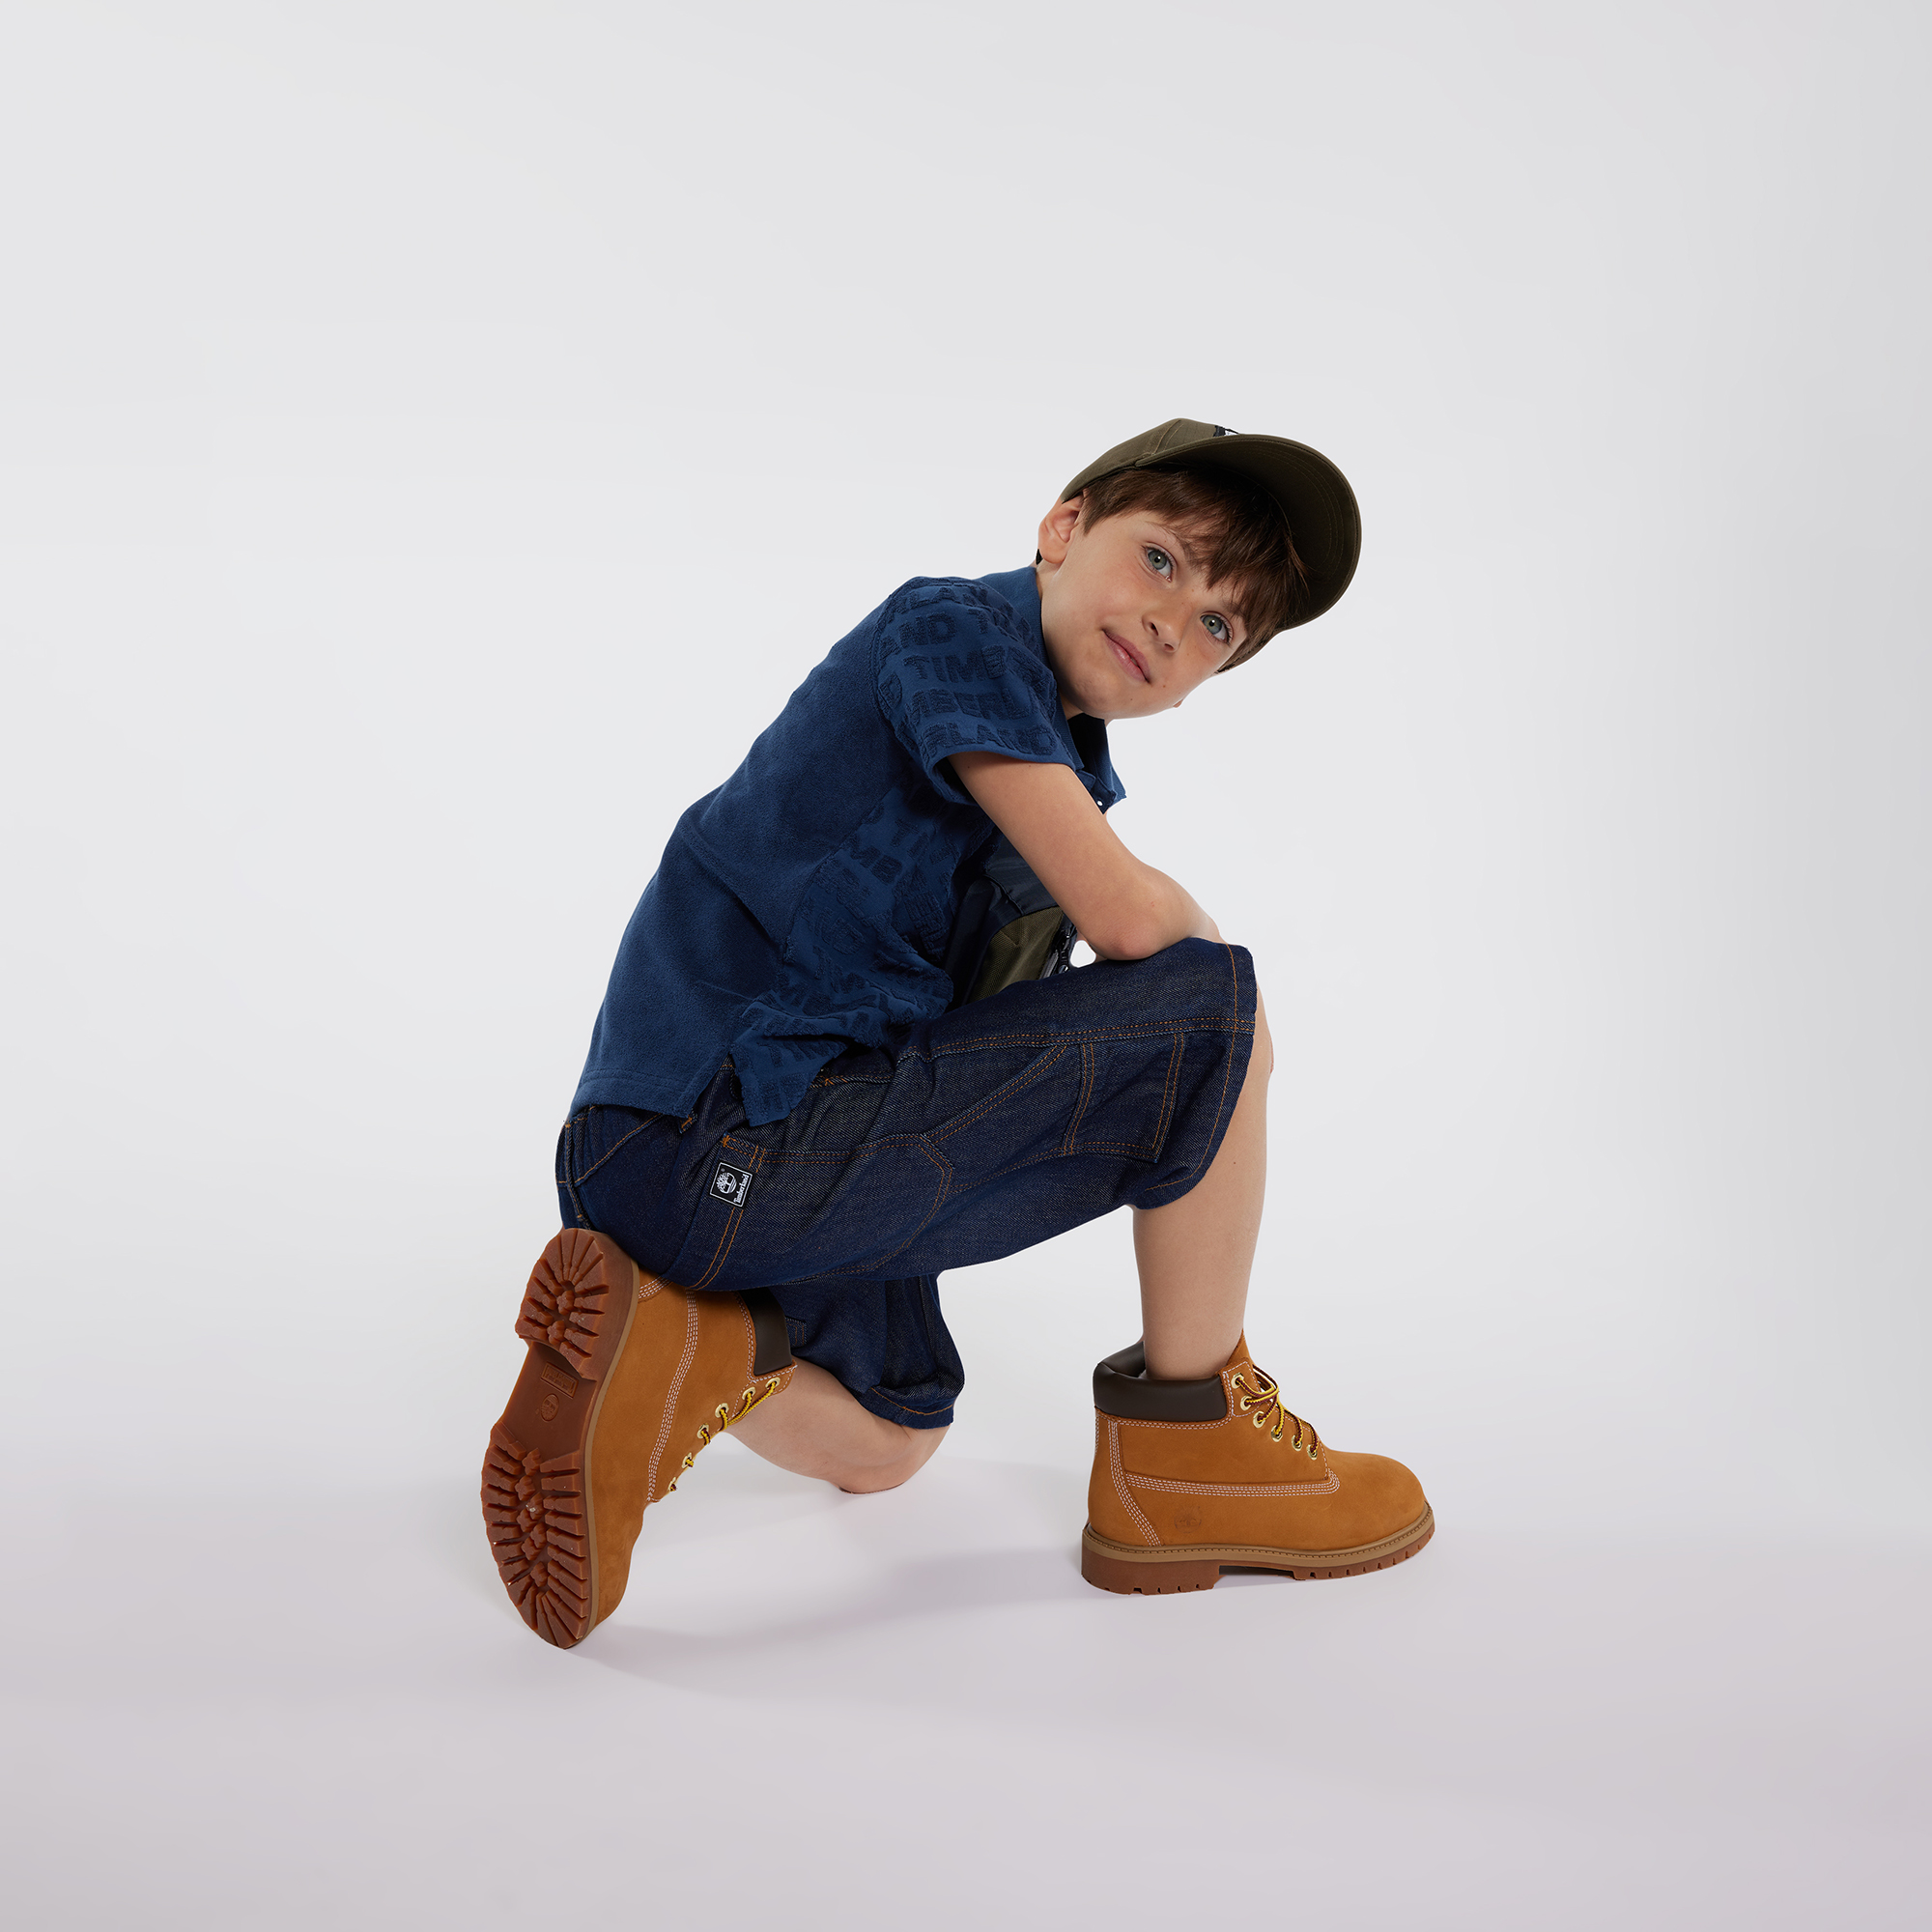 Short-sleeved terry polo shirt TIMBERLAND for BOY